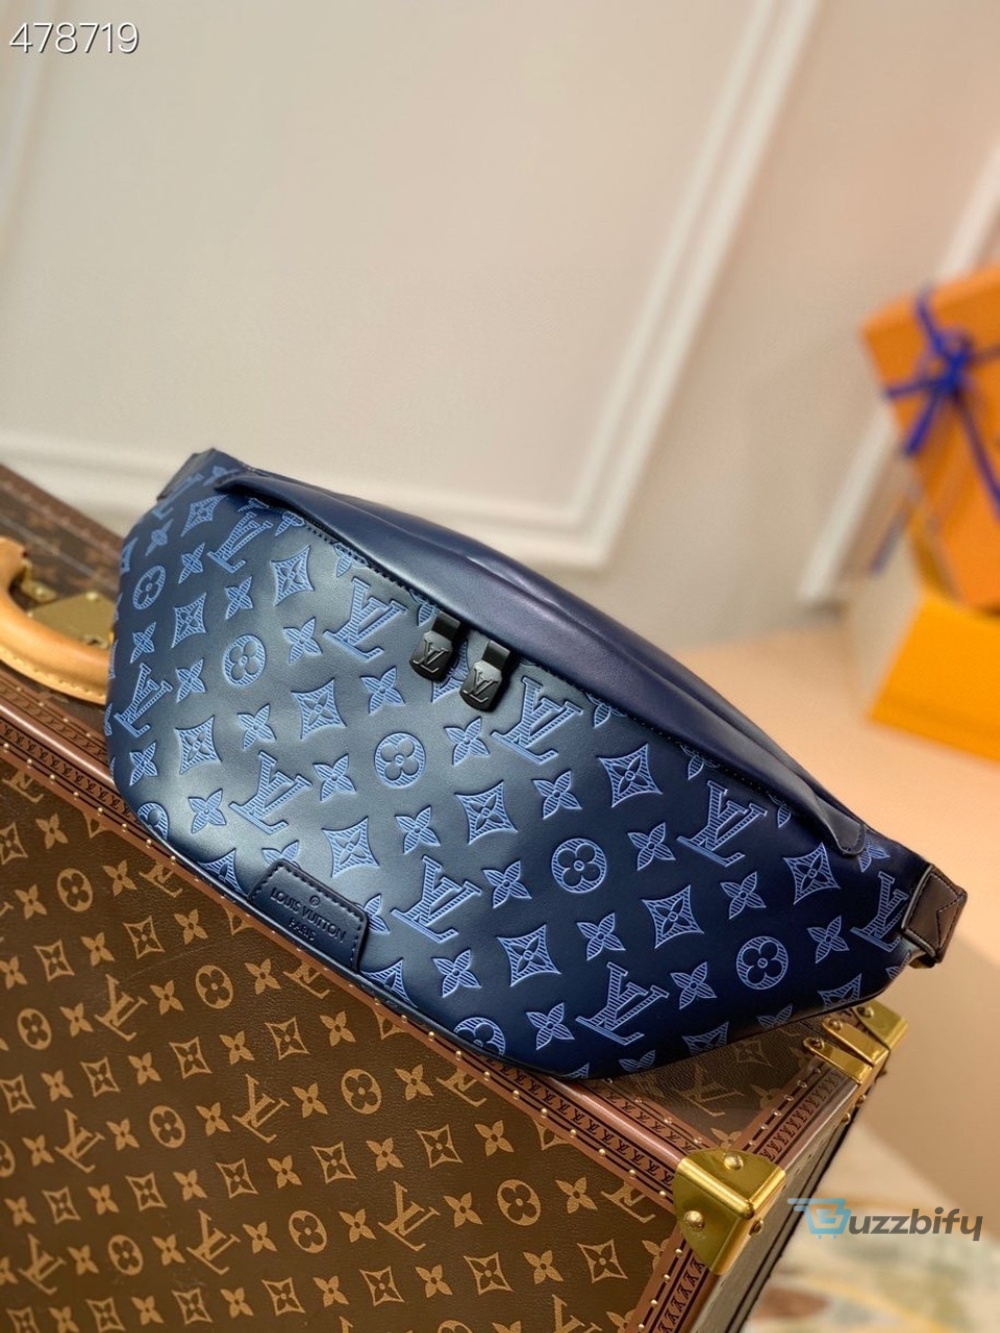 louis vuitton discovery bumbag pm monogram shadow navy blue for men mens belt bags 173in44cm lv m45729 2799 buzzbify 1 29